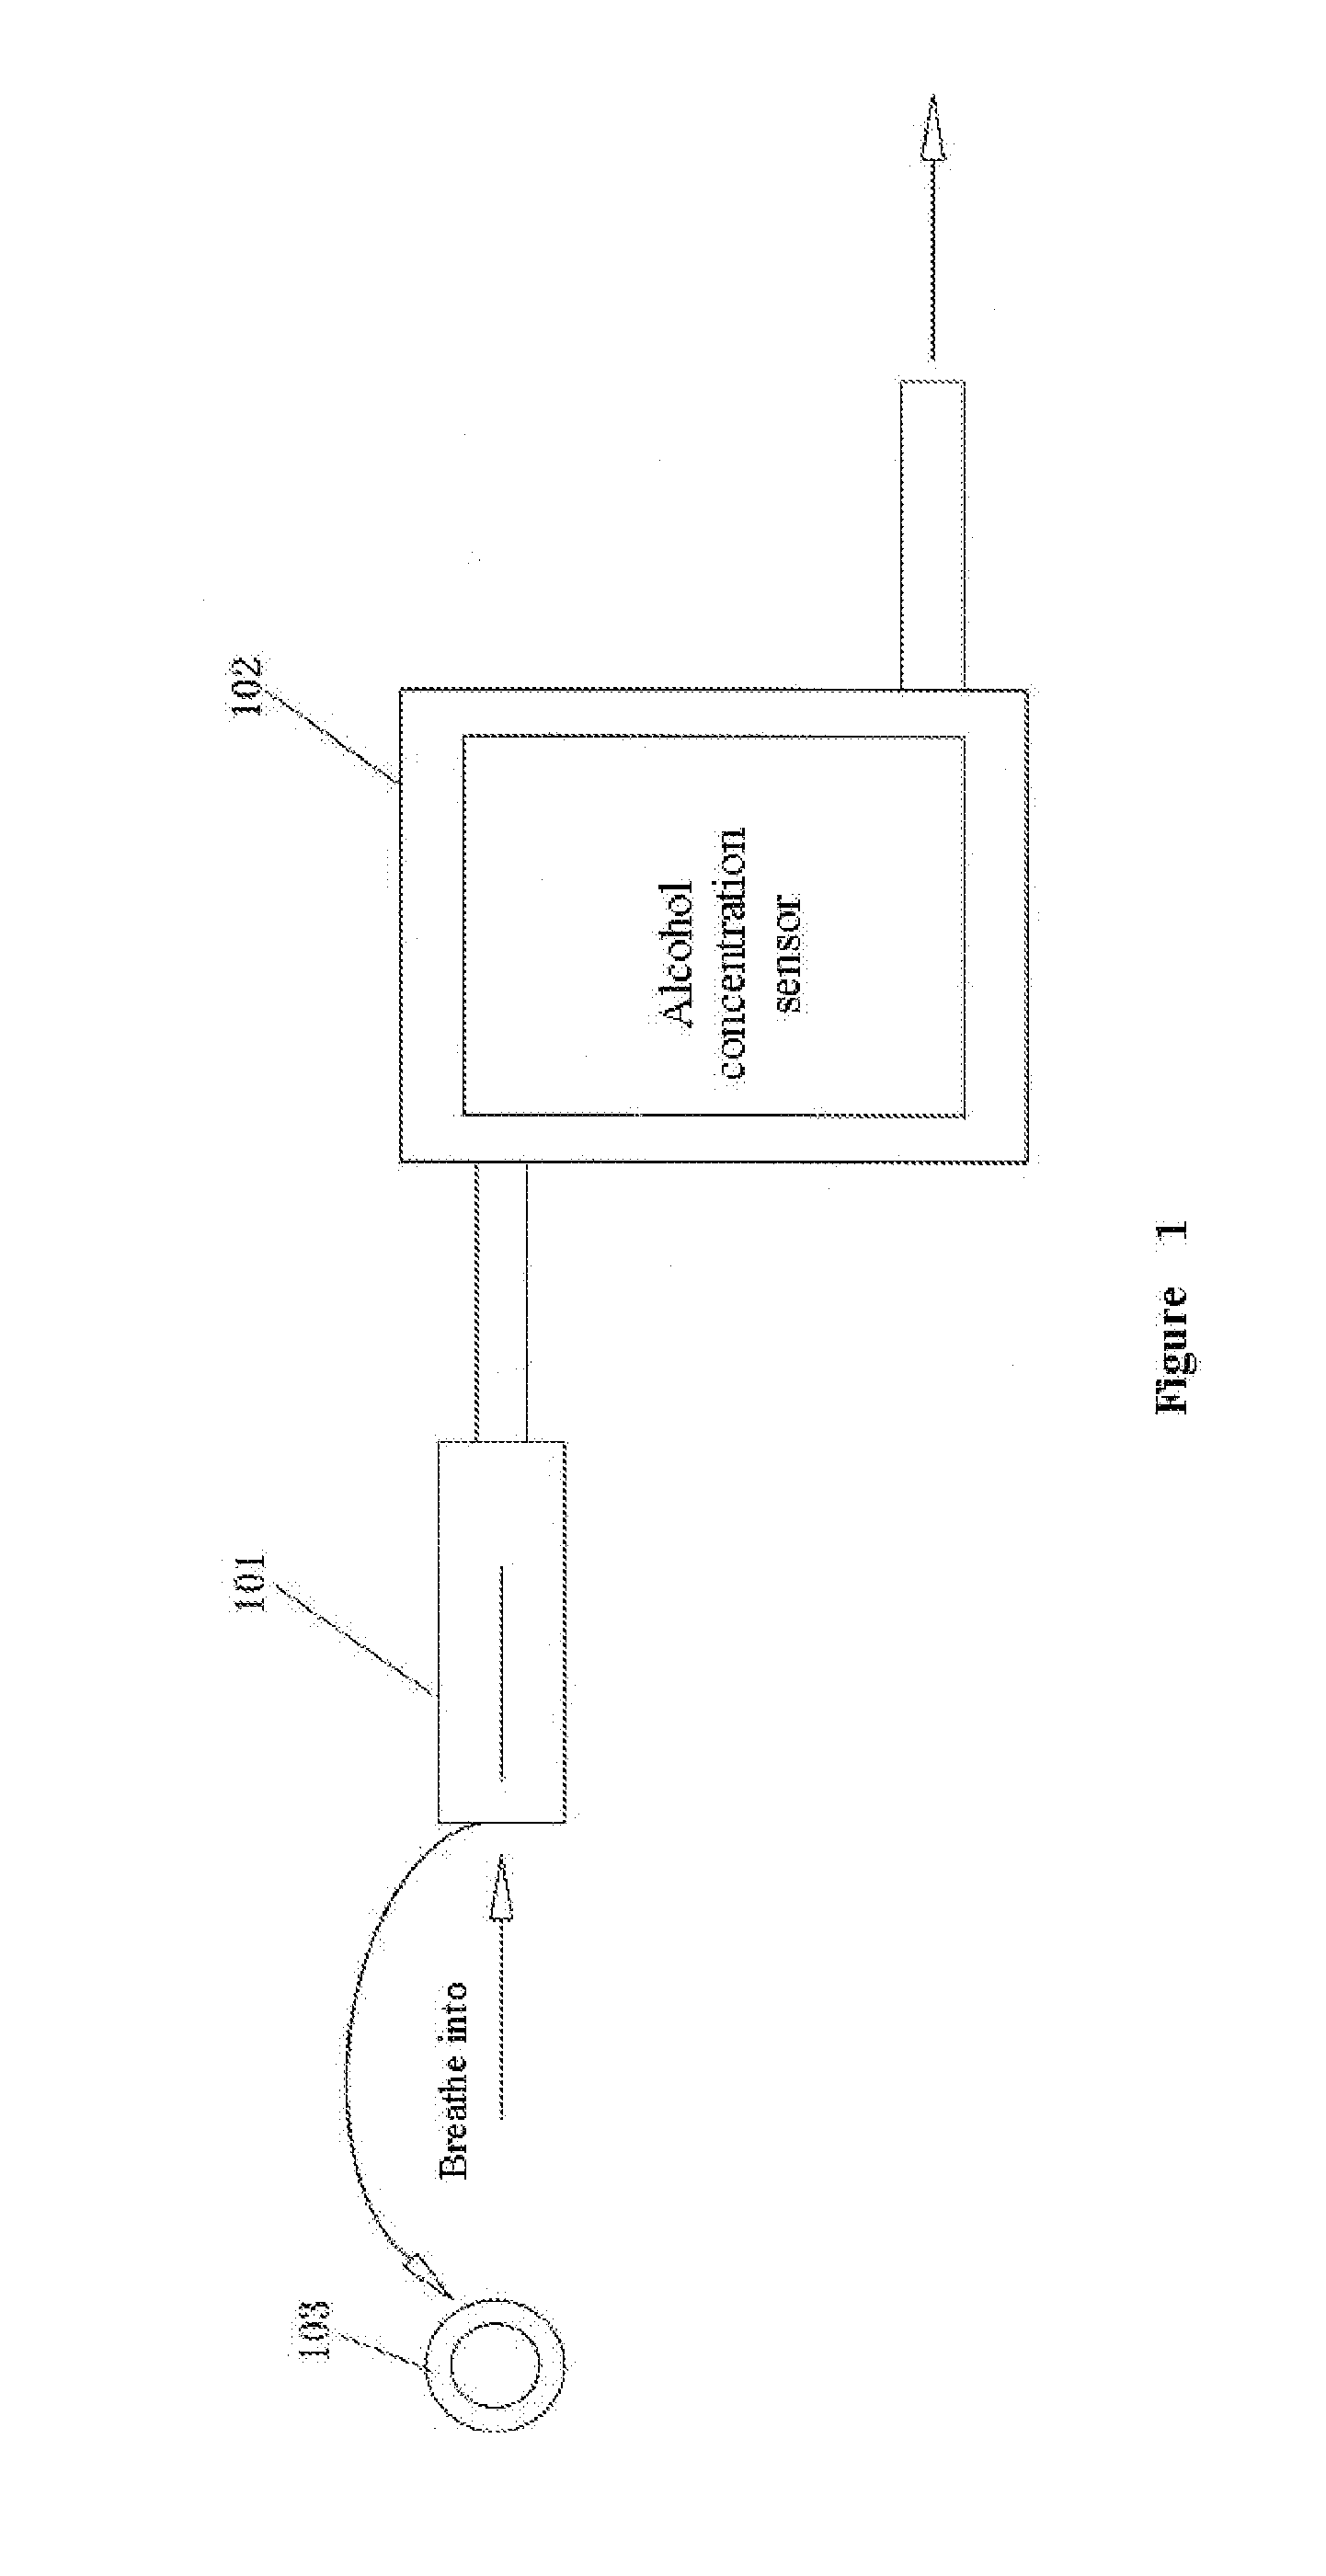 Breath Alcohol Analyser And A Method Of Determining Whether A Driver Is In A Condition To Drive